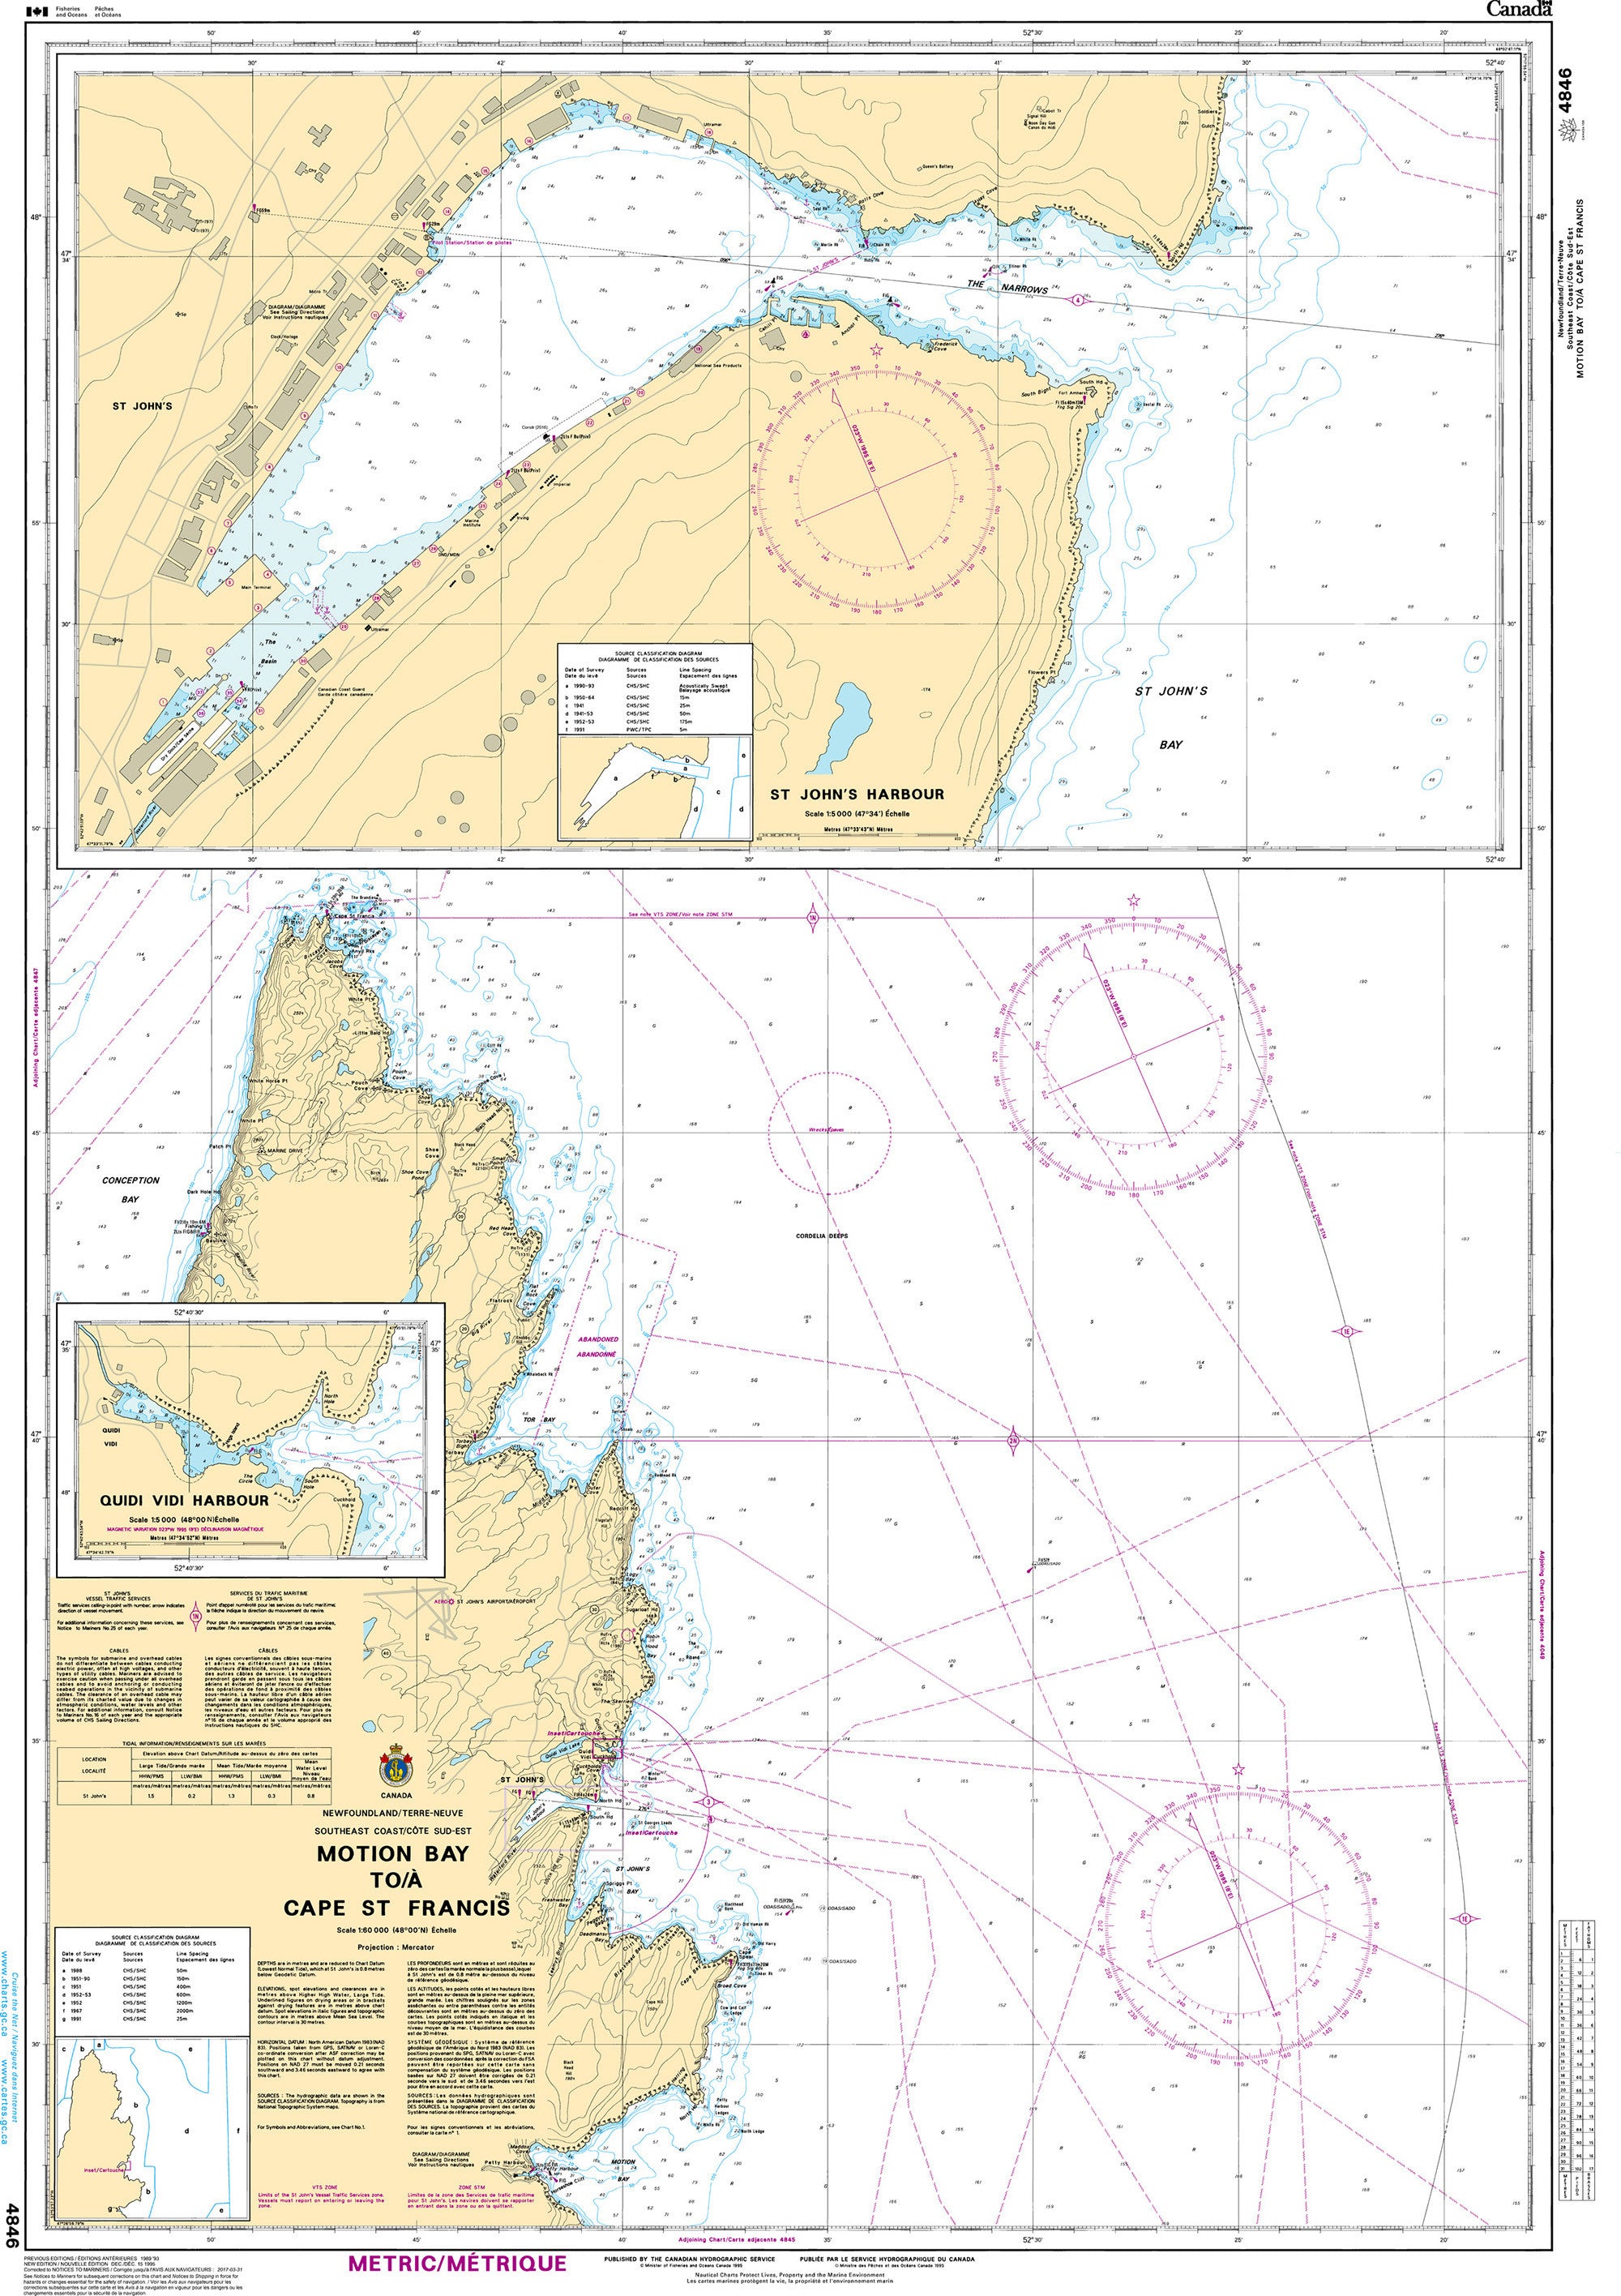 Canadian Hydrographic Service Nautical Chart CHS4846: Motion Bay to / à Cape St Francis